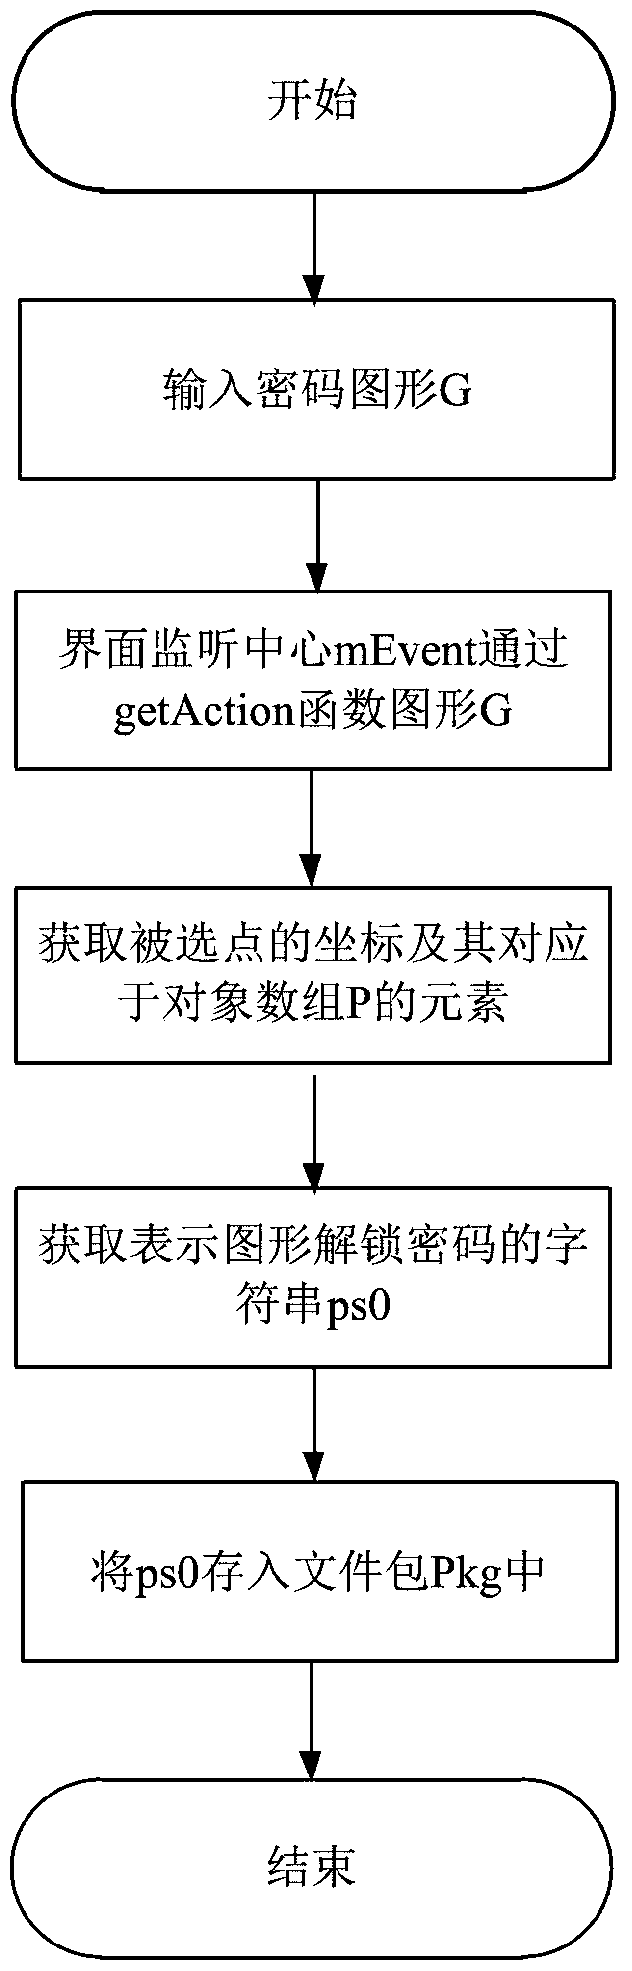 Identity authentication improvement method for graphic unlocking password in Android system